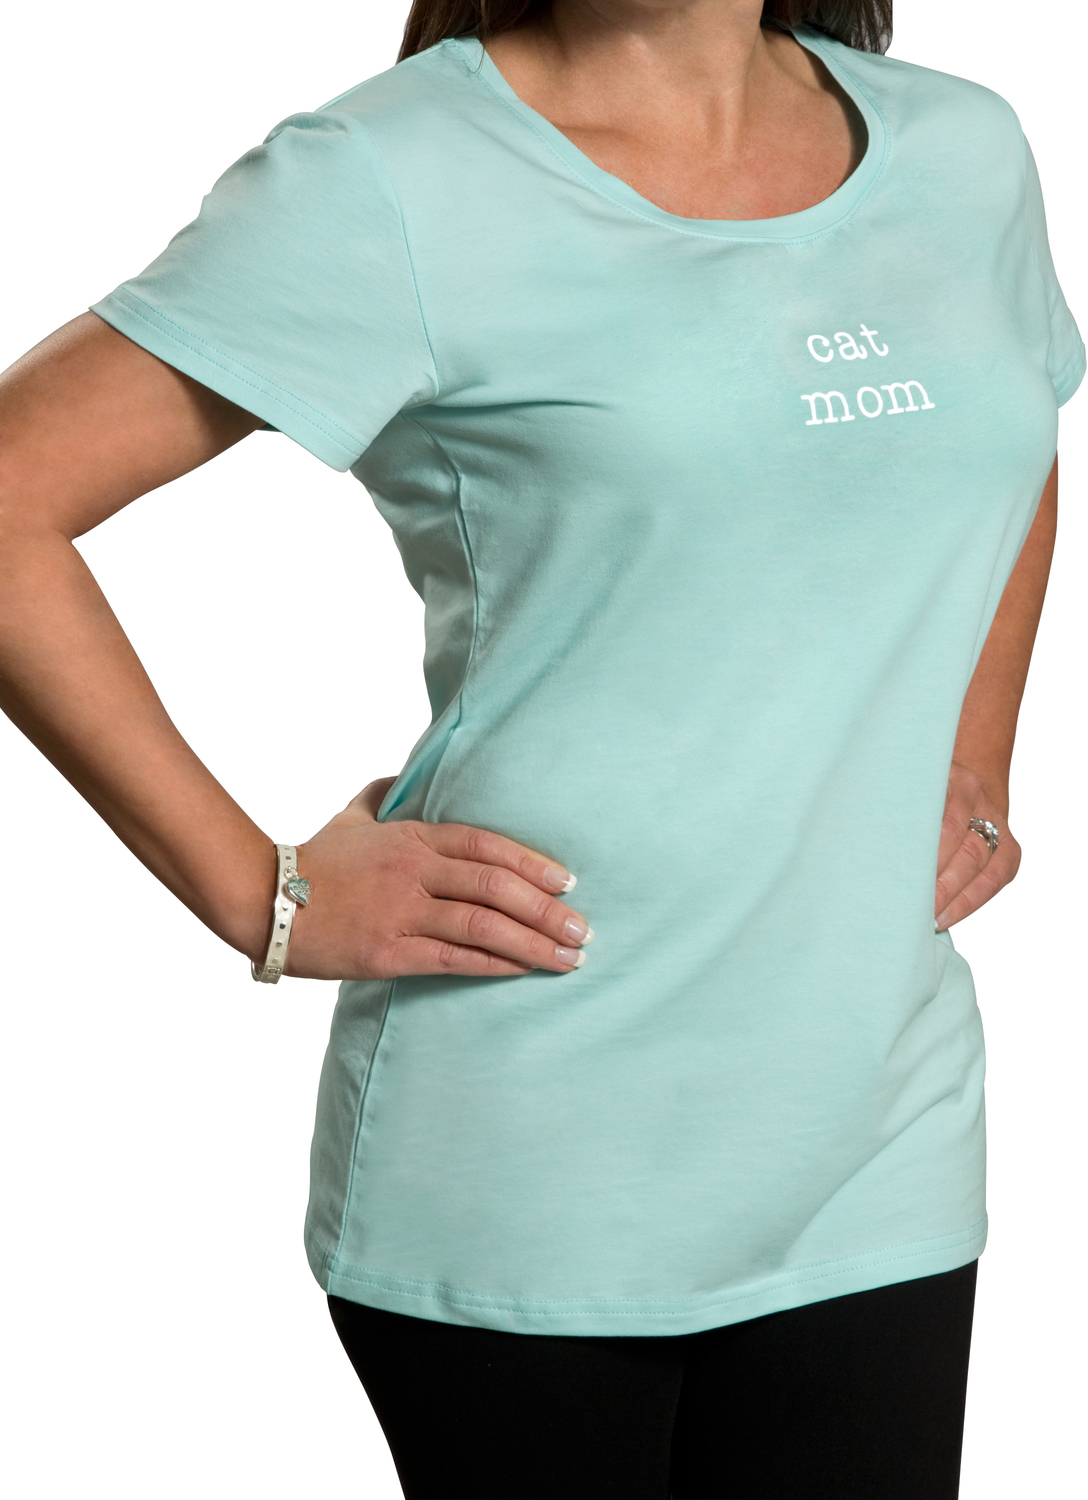 Cat Mom by Mom Love - Cat Mom - Small Teal/Mint Green T-Shirt
